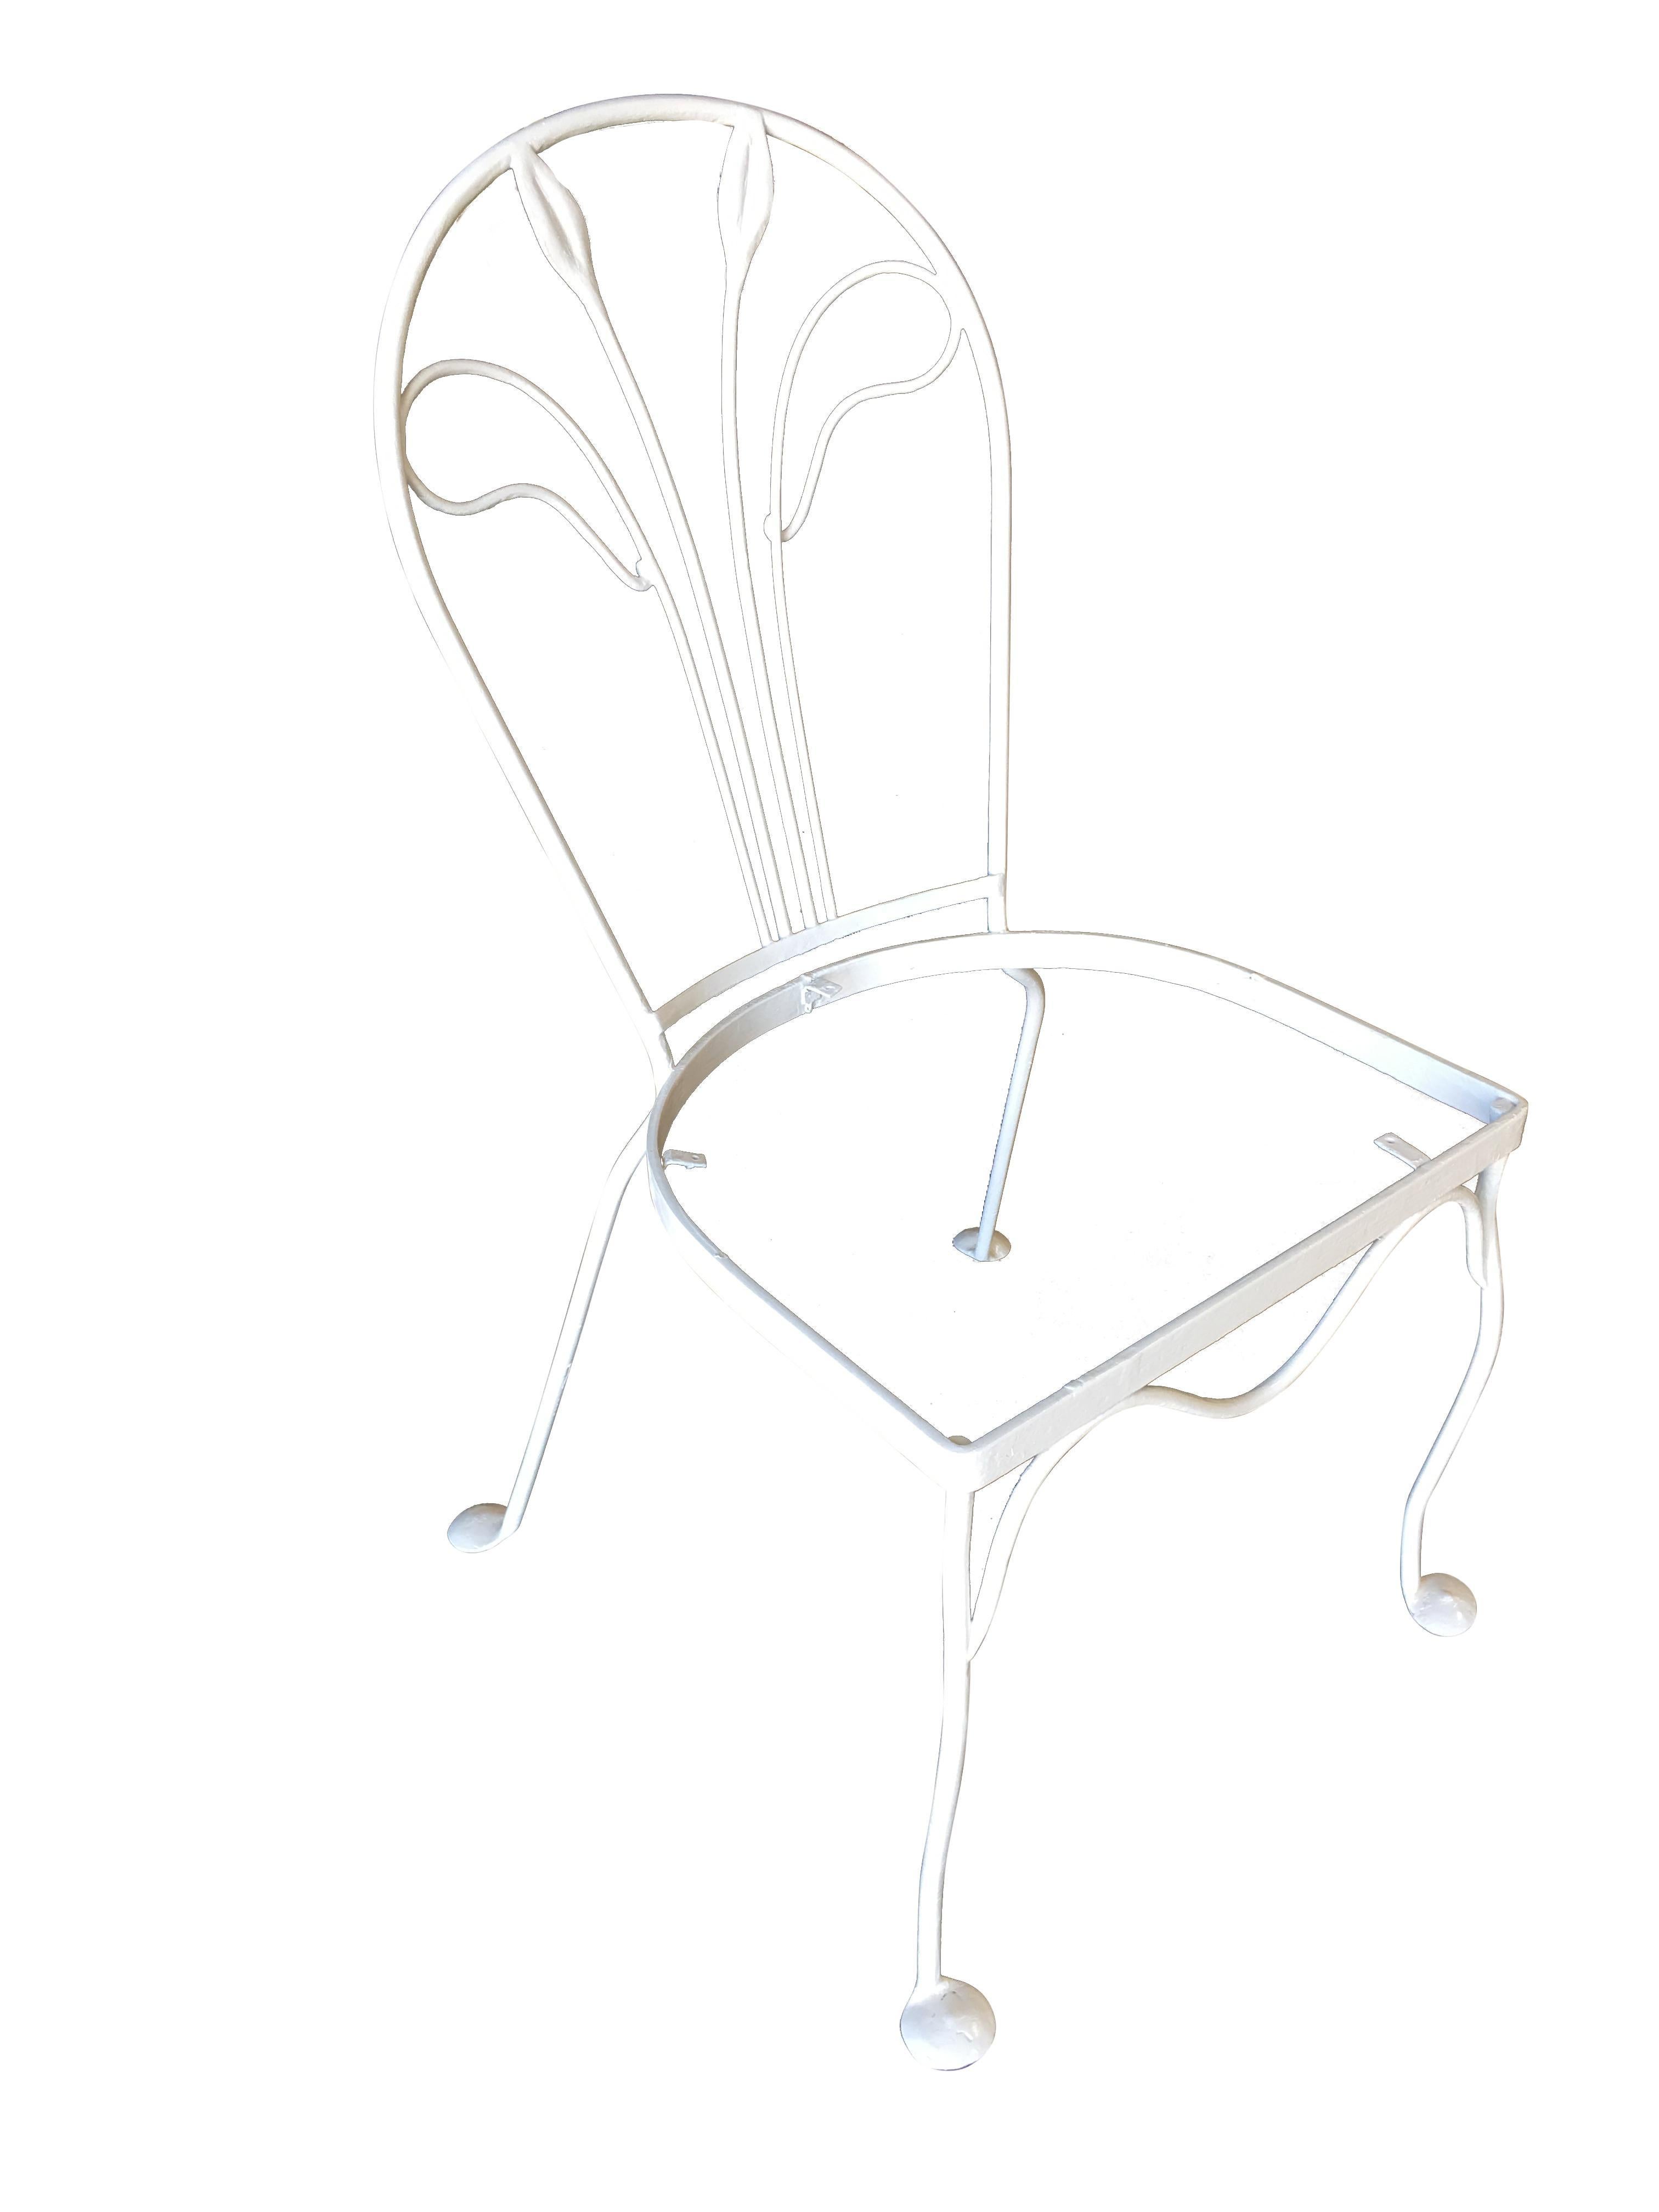 A set of four Woodard rod iron outdoor/patio chair with a distinct tropical leaf backrest. This chair is constructed with solid core iron rods and is finished in your choice of a pure white or black finish with padded seats. All outdoor furniture